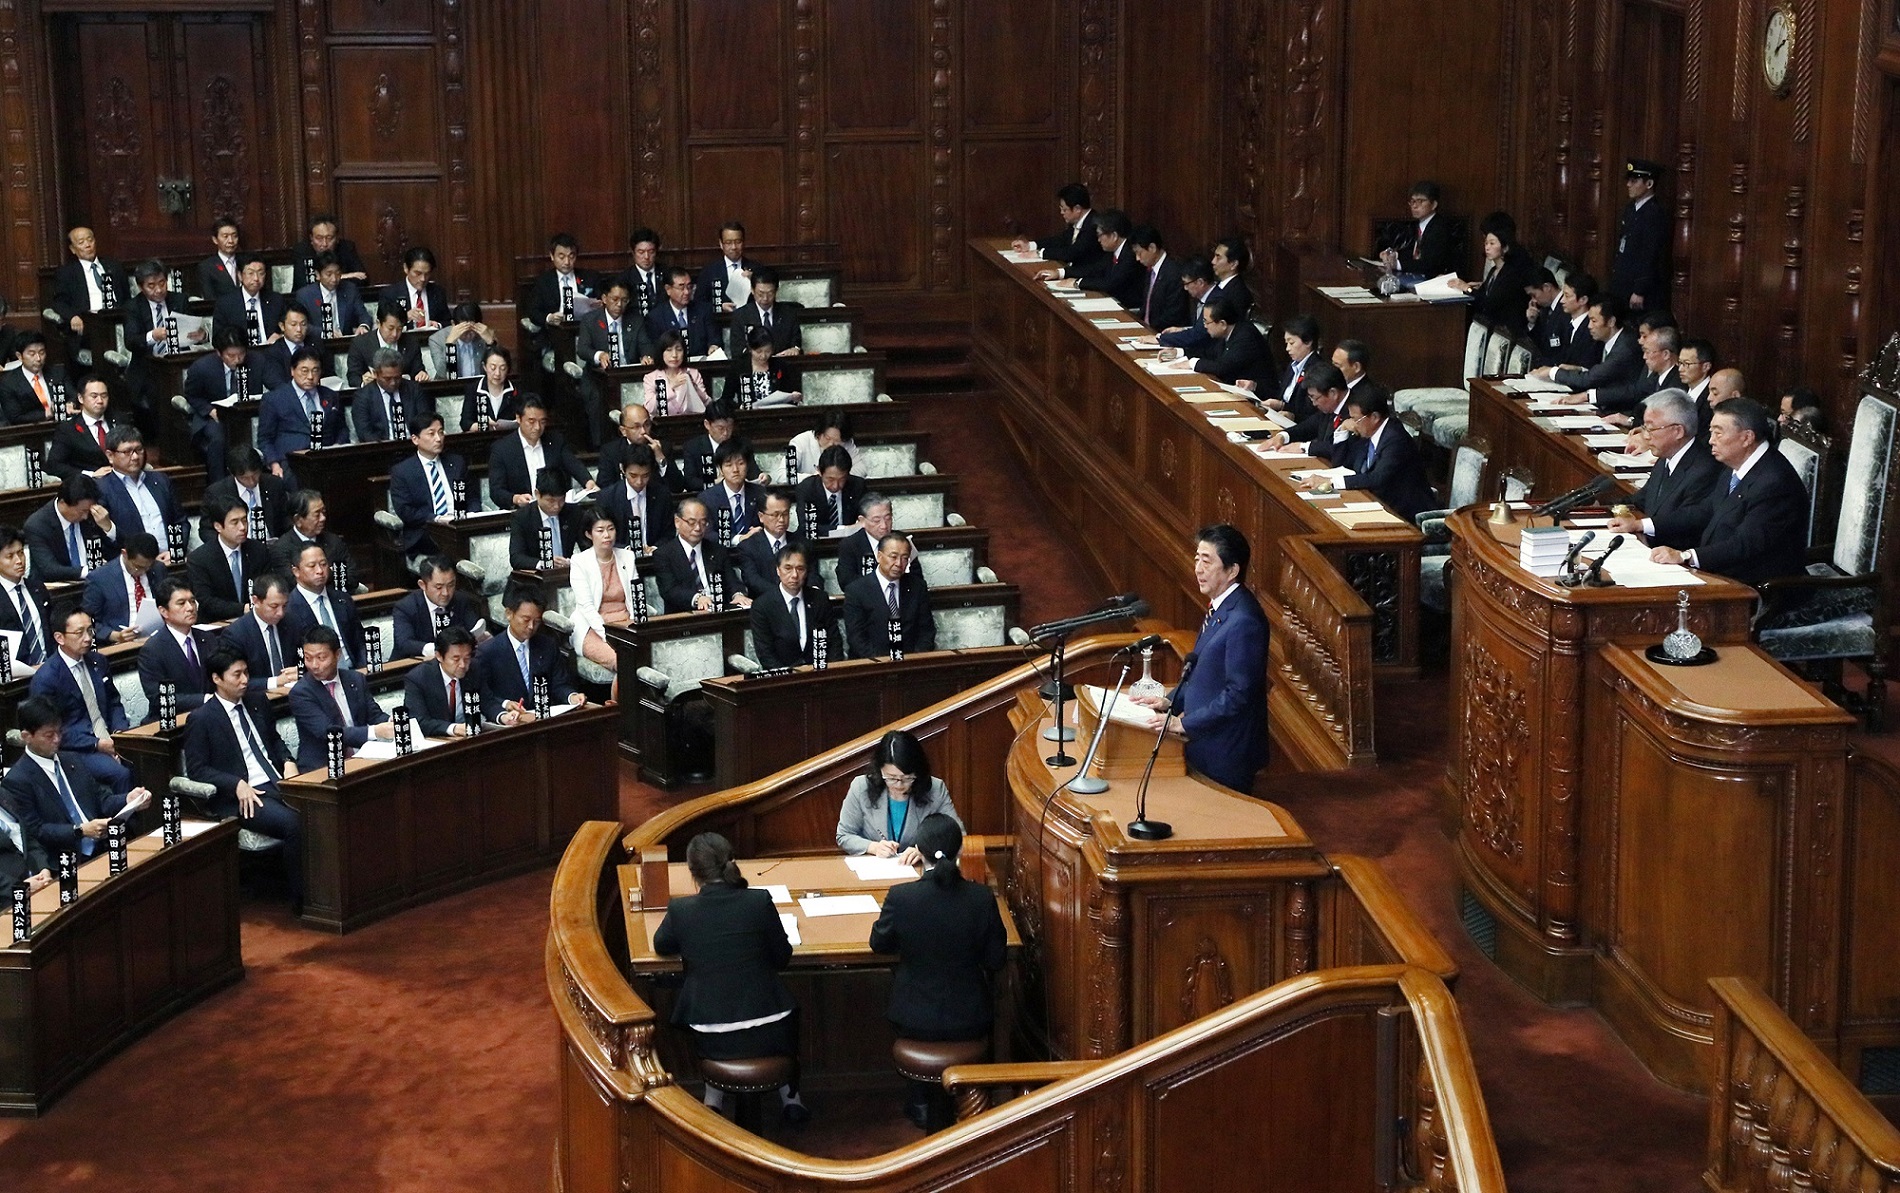 Photograph of the Prime Minister delivering a policy speech during the plenary session of the House of Representatives (16)